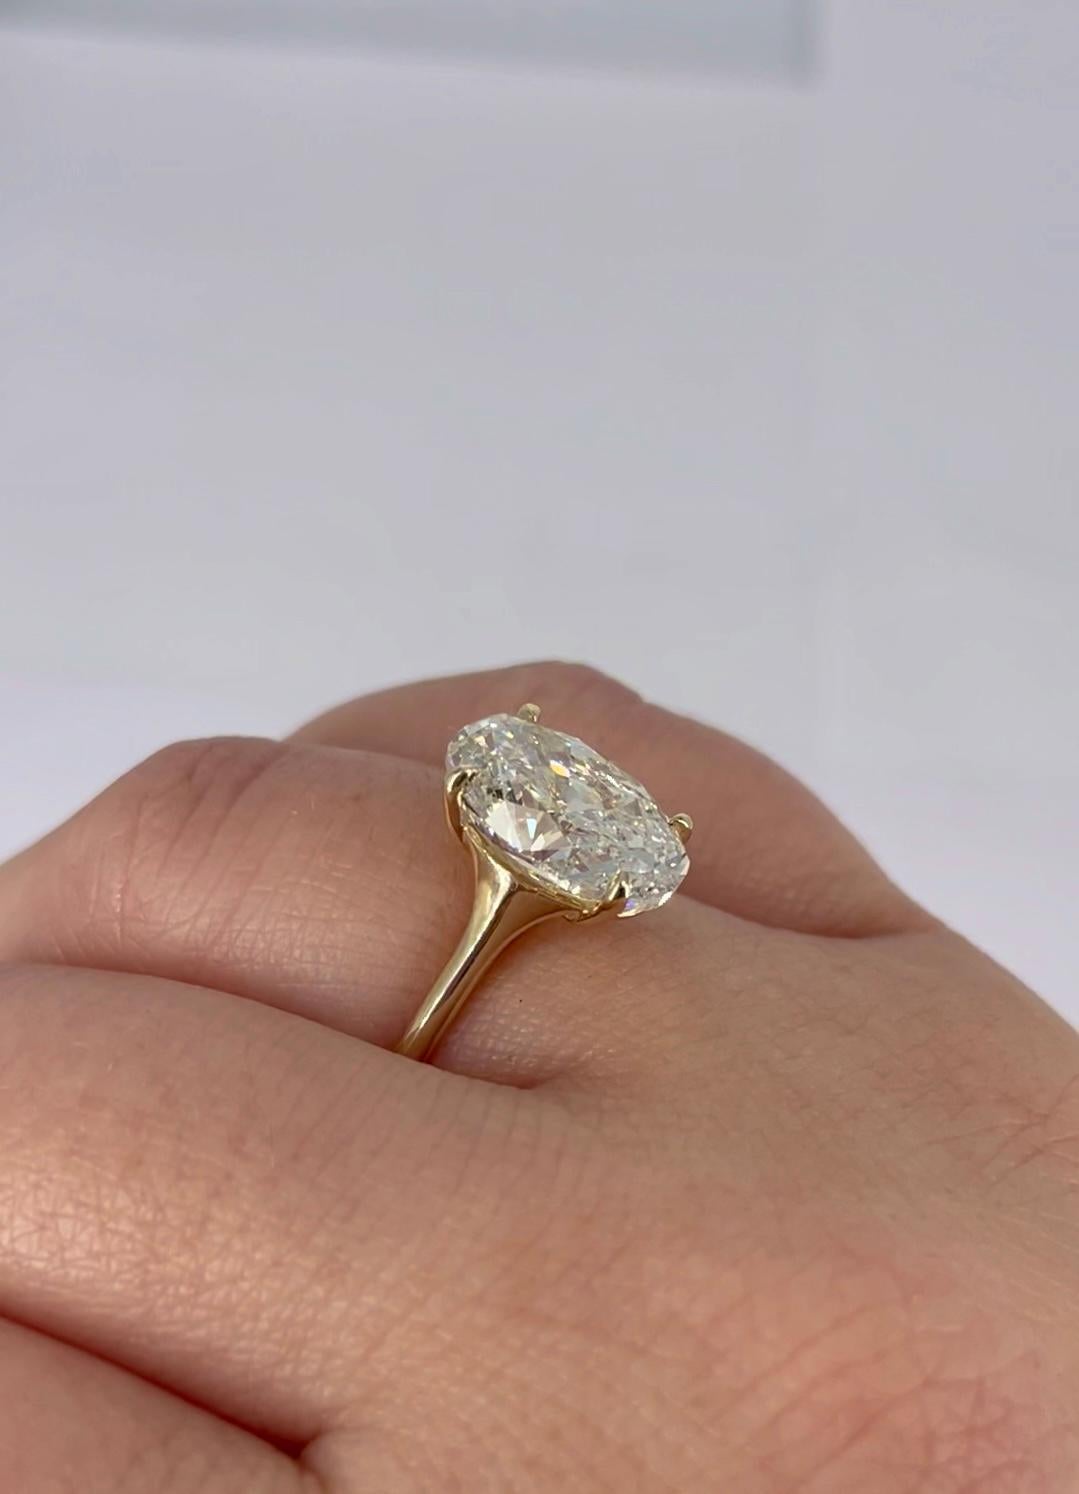 J. Birnbach 3.95 carat Oval Diamond Solitaire Engagement Ring in 14K Yellow Gold In New Condition For Sale In New York, NY